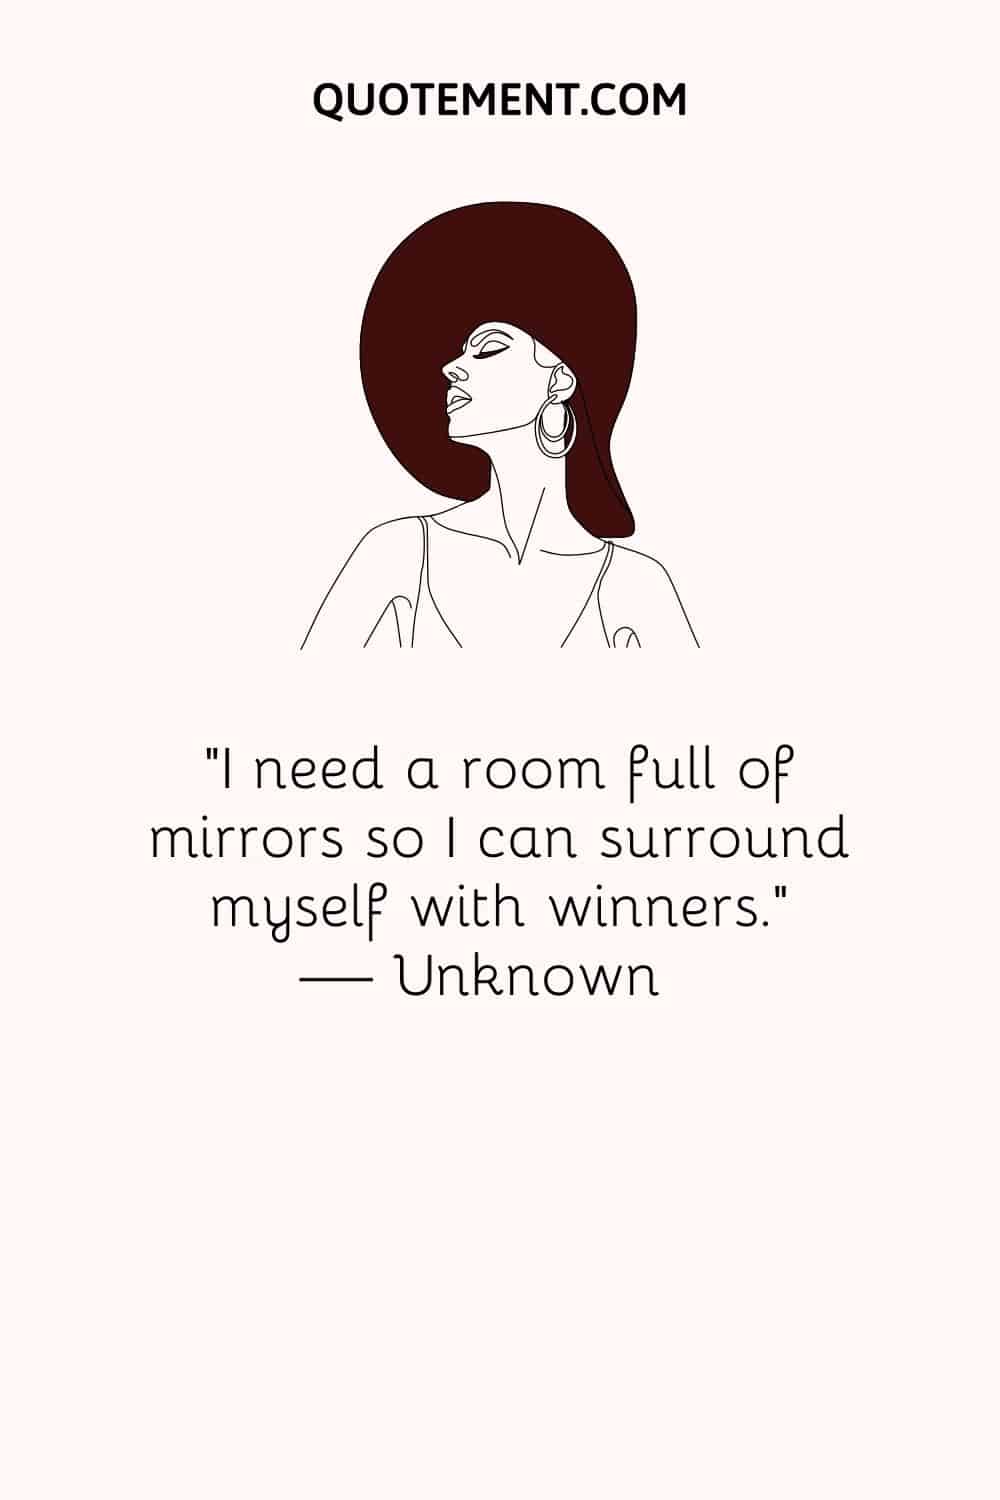 “I need a room full of mirrors so I can surround myself with winners.” — Unknown